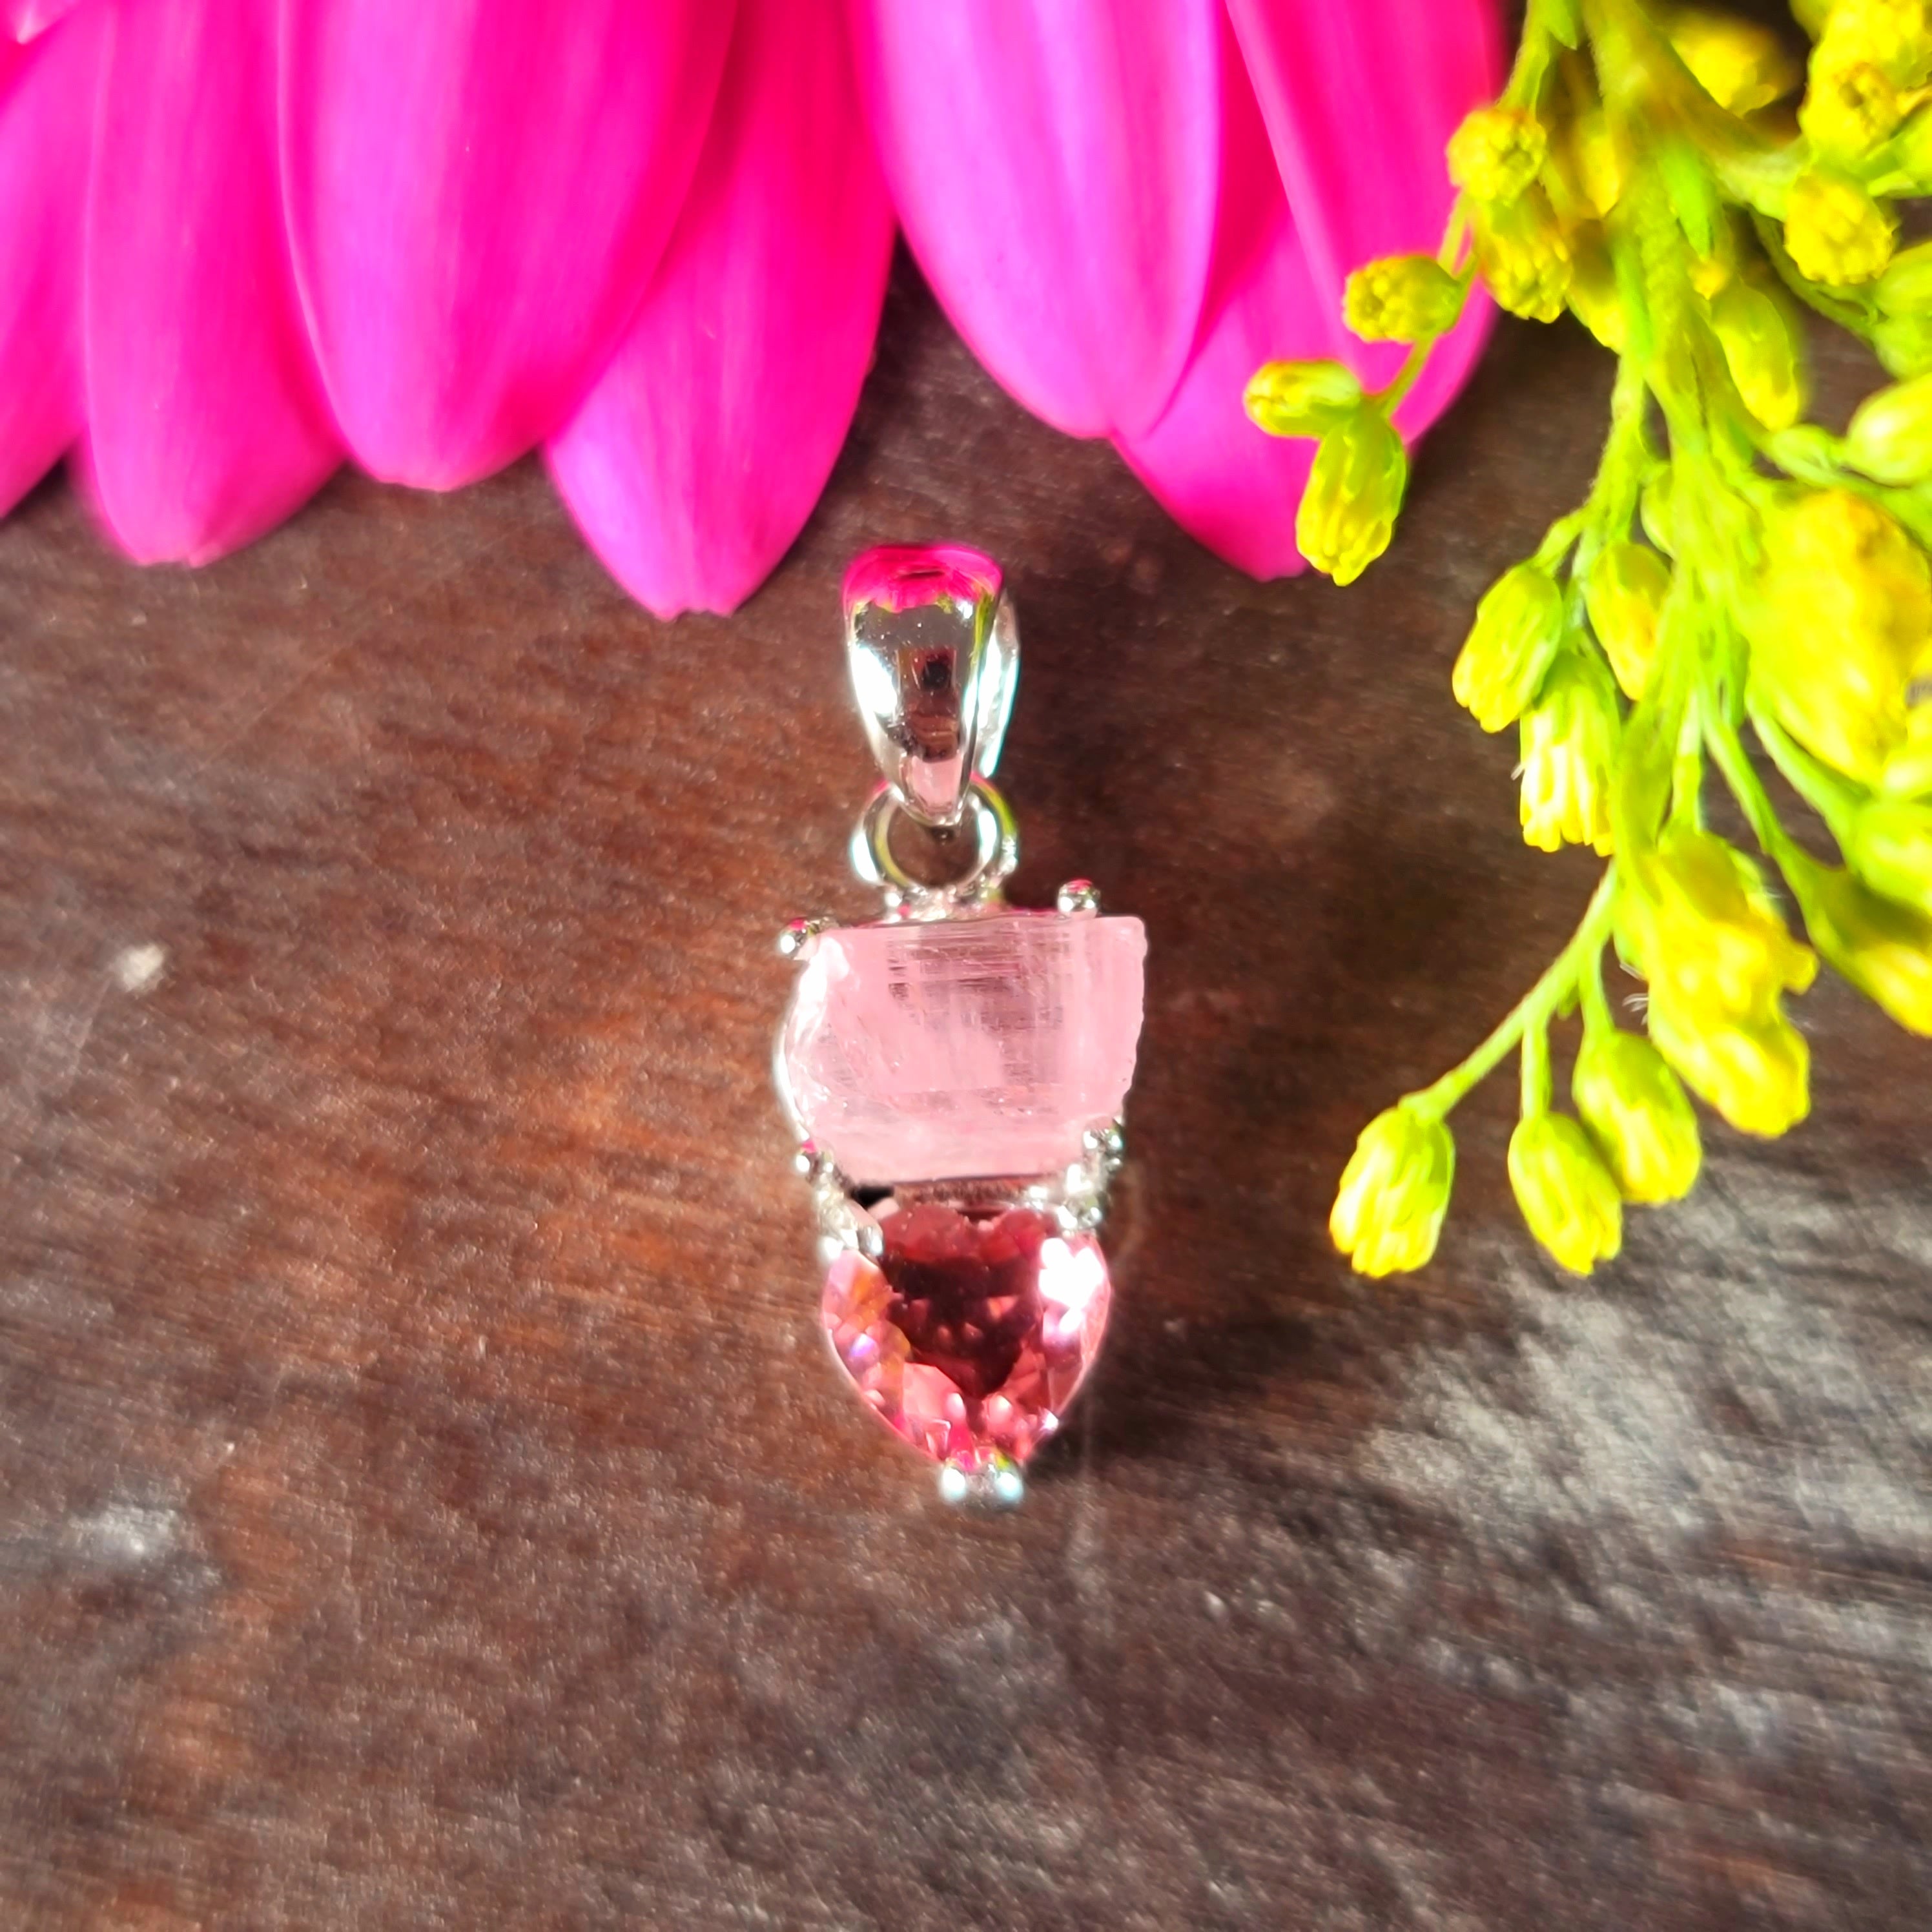 Tourmaline Heart Pendant .925 Silver for Removing Insecurities and Helping Inspire Creativity